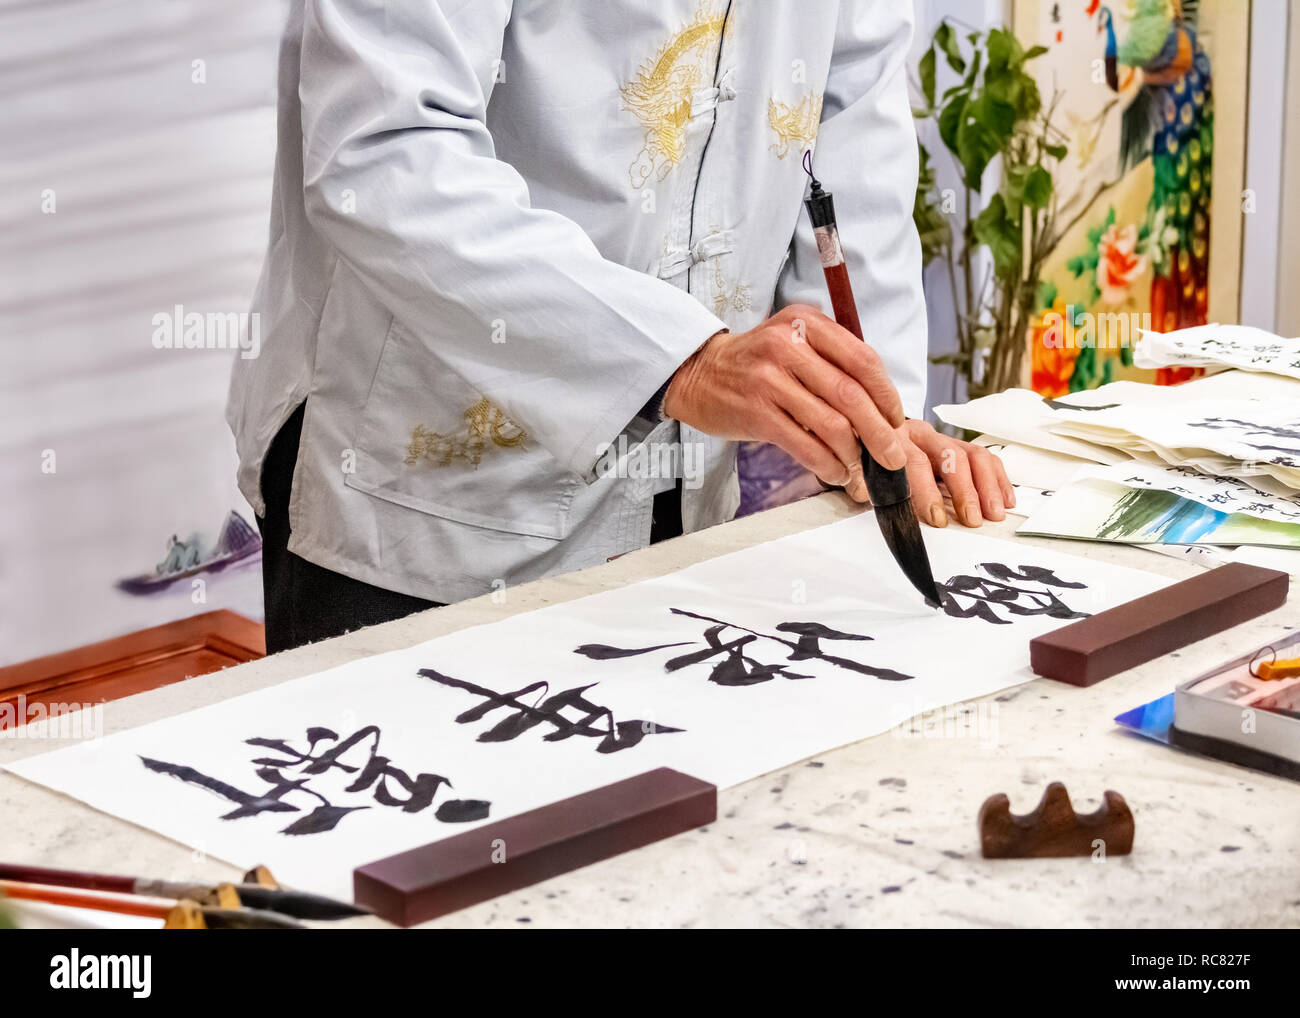 Asian caligraphy. The master of Chinese Caligraphy writes characters and hieroglyphs that read Xin nian kuai le and are translated as Happy New Year. Stock Photo